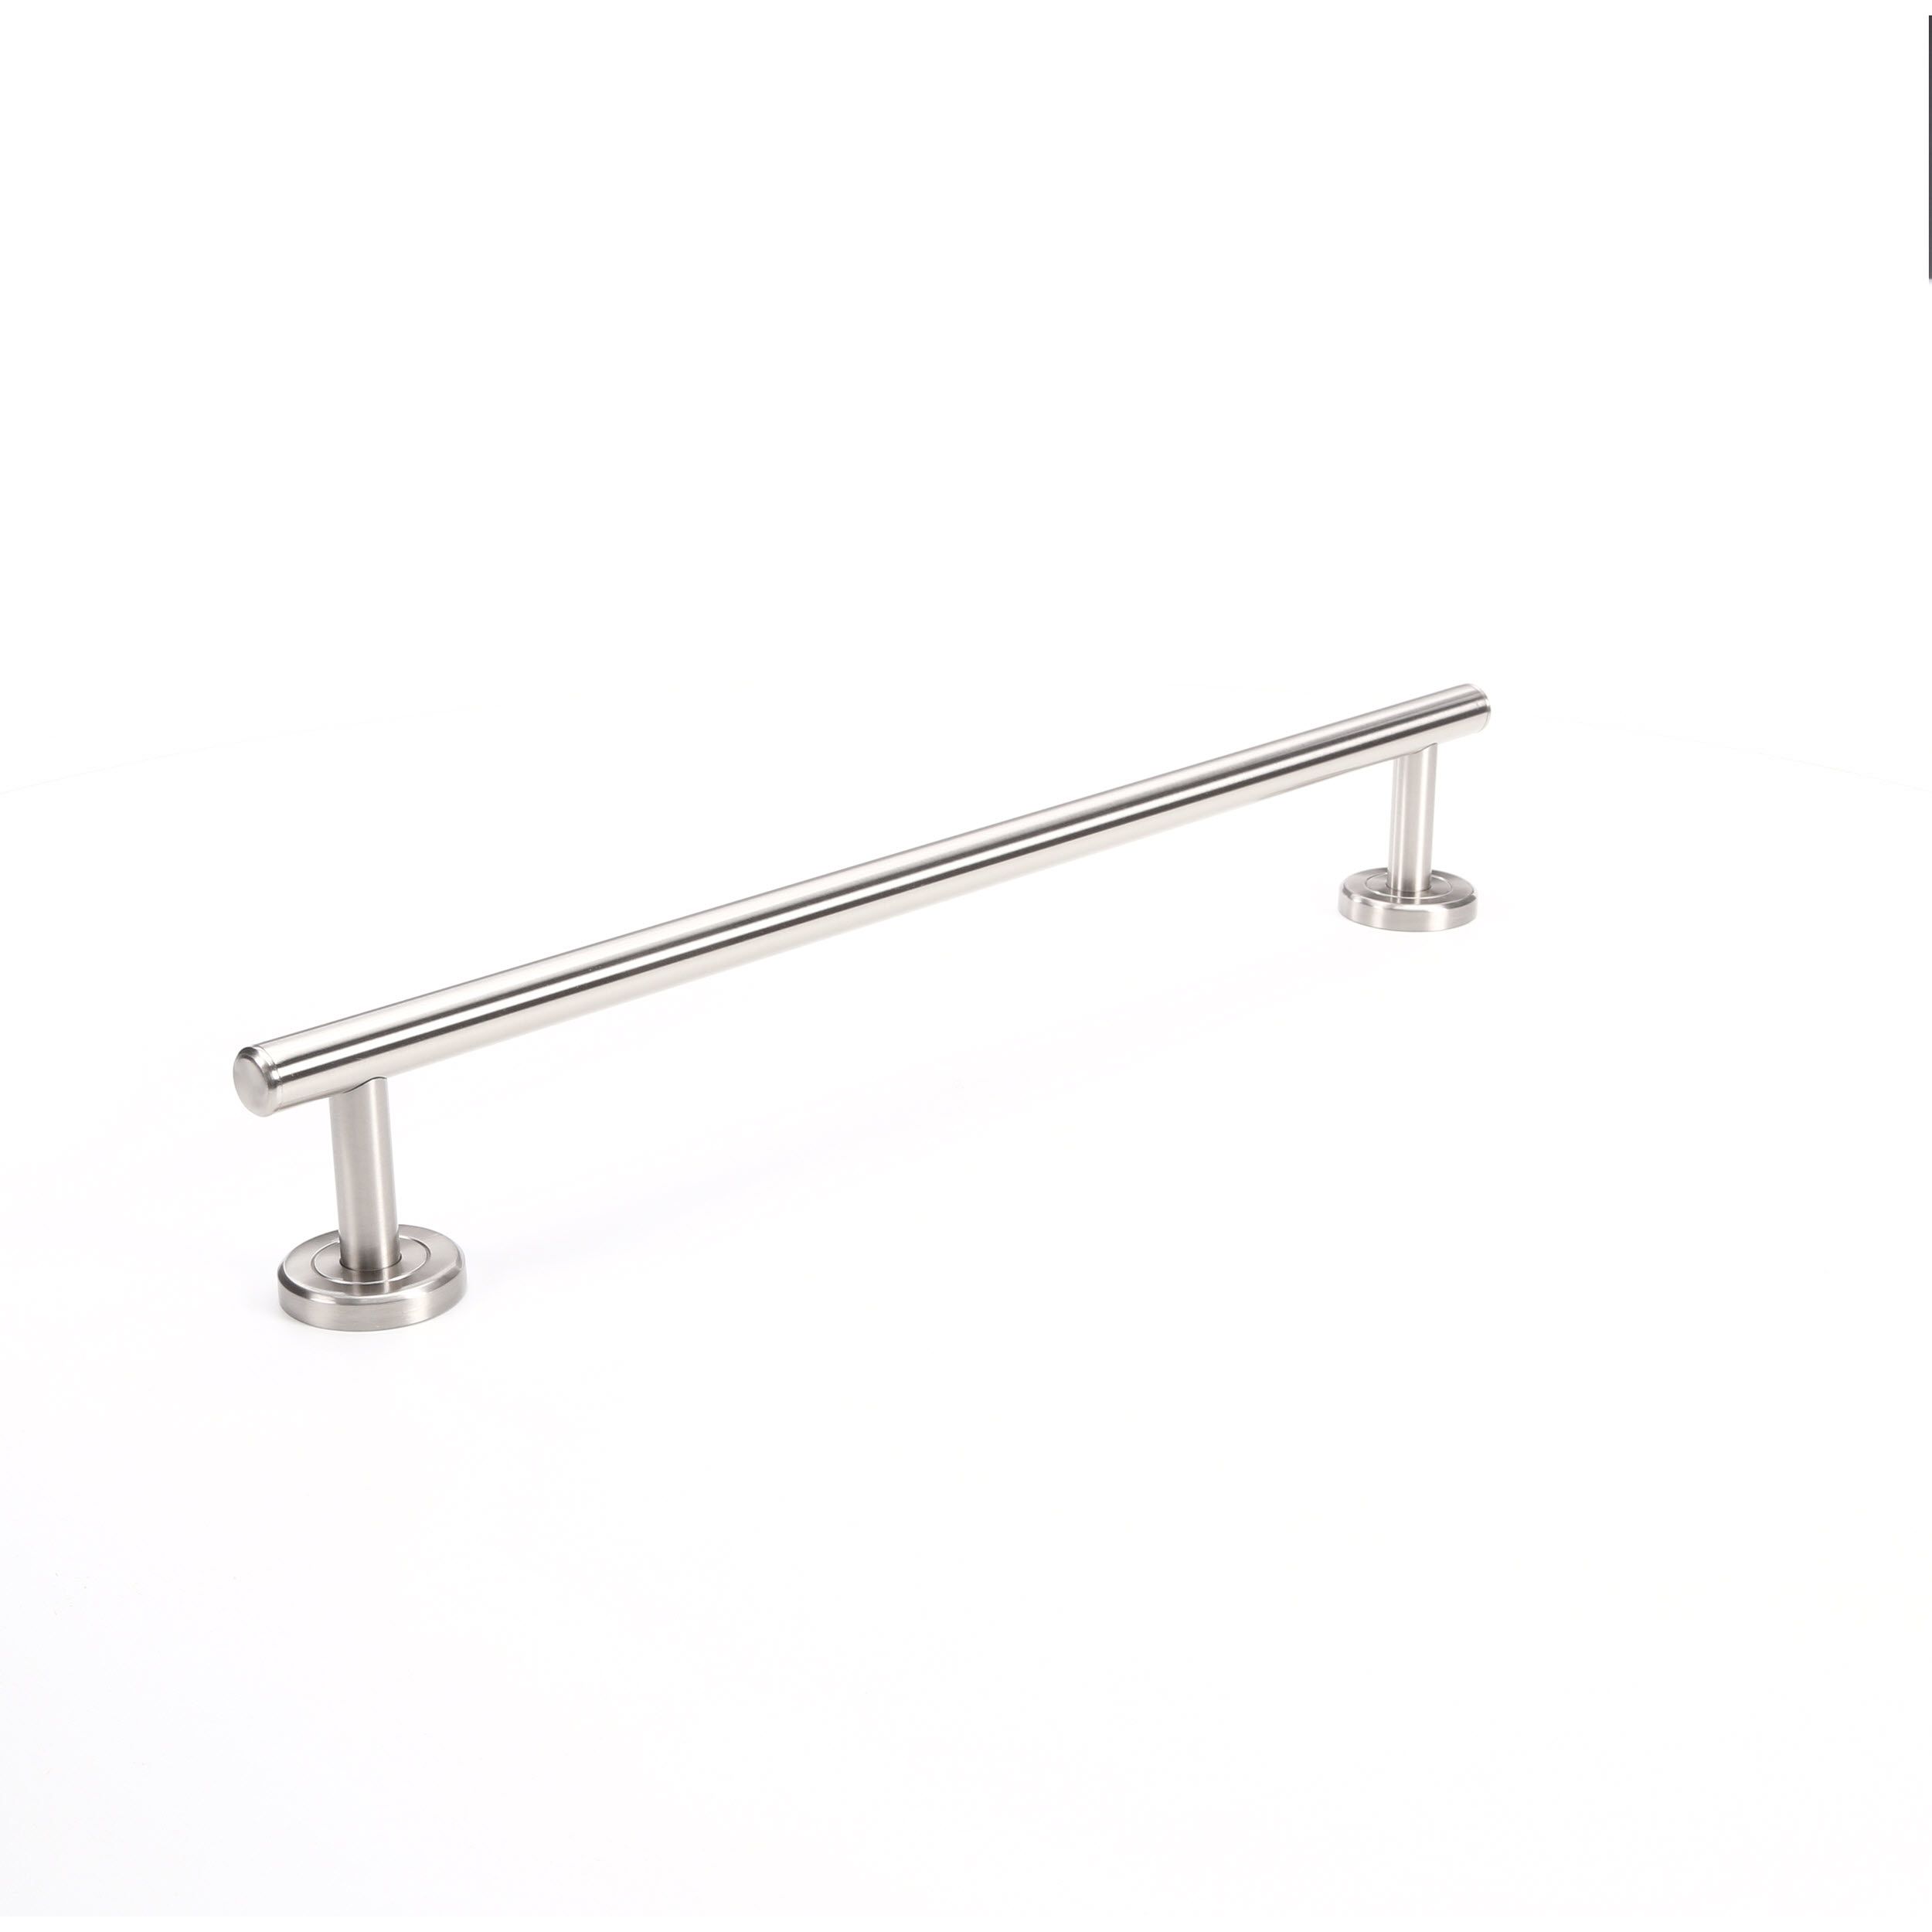 Satin Nickel Gatco 4291 18" Towel Bar from the Latitude Collection 